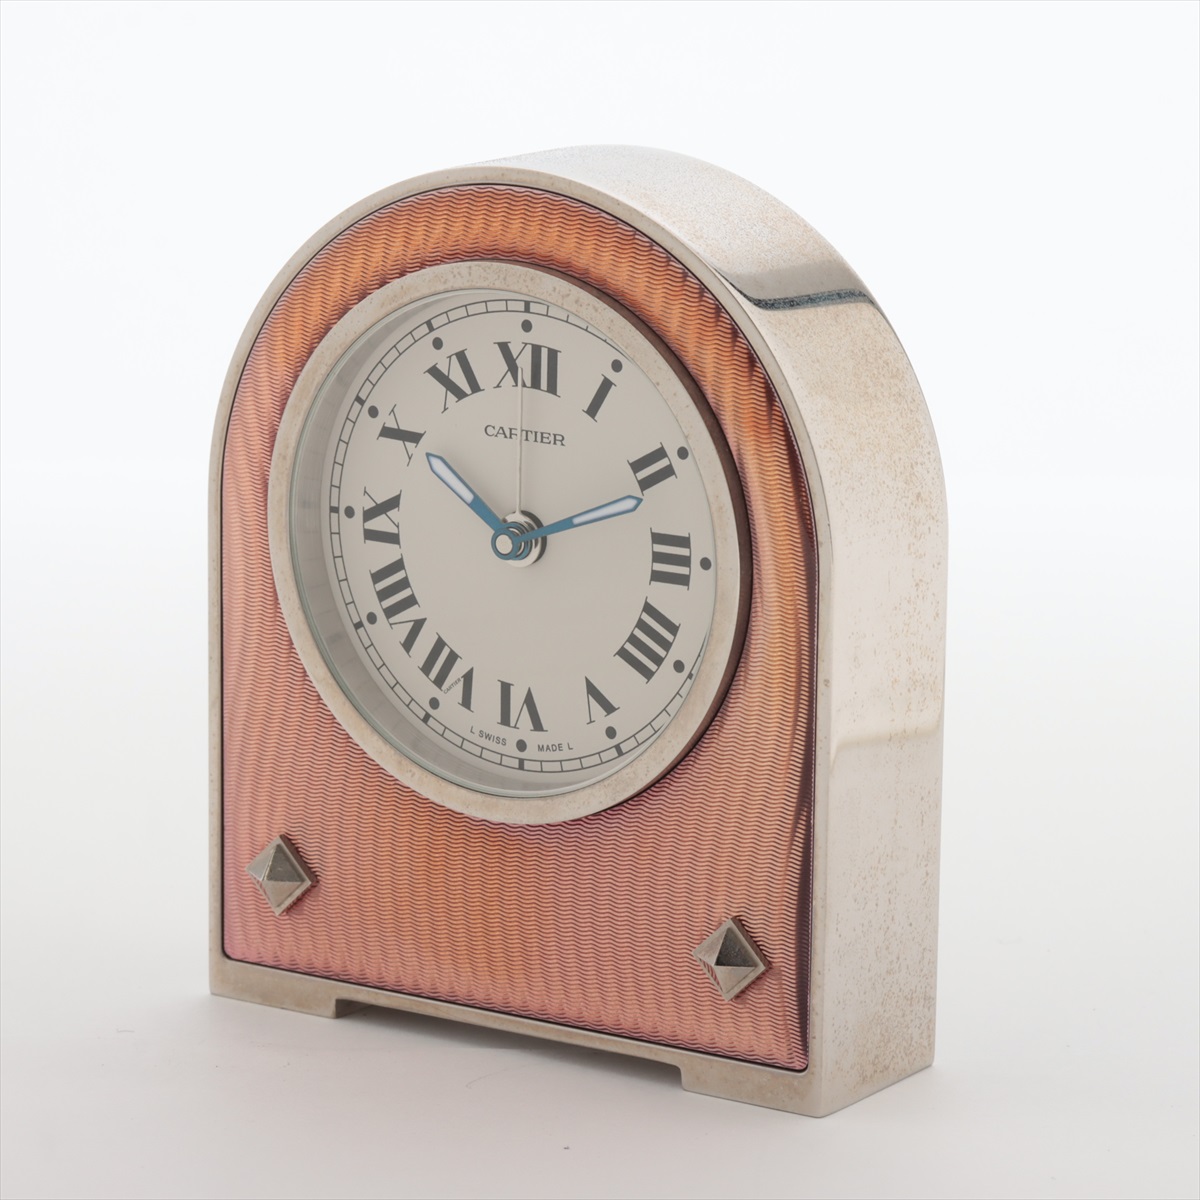 Cartier Steel and Lacquer Desk Clock with Alarm, Ref. 2746 – SWISS